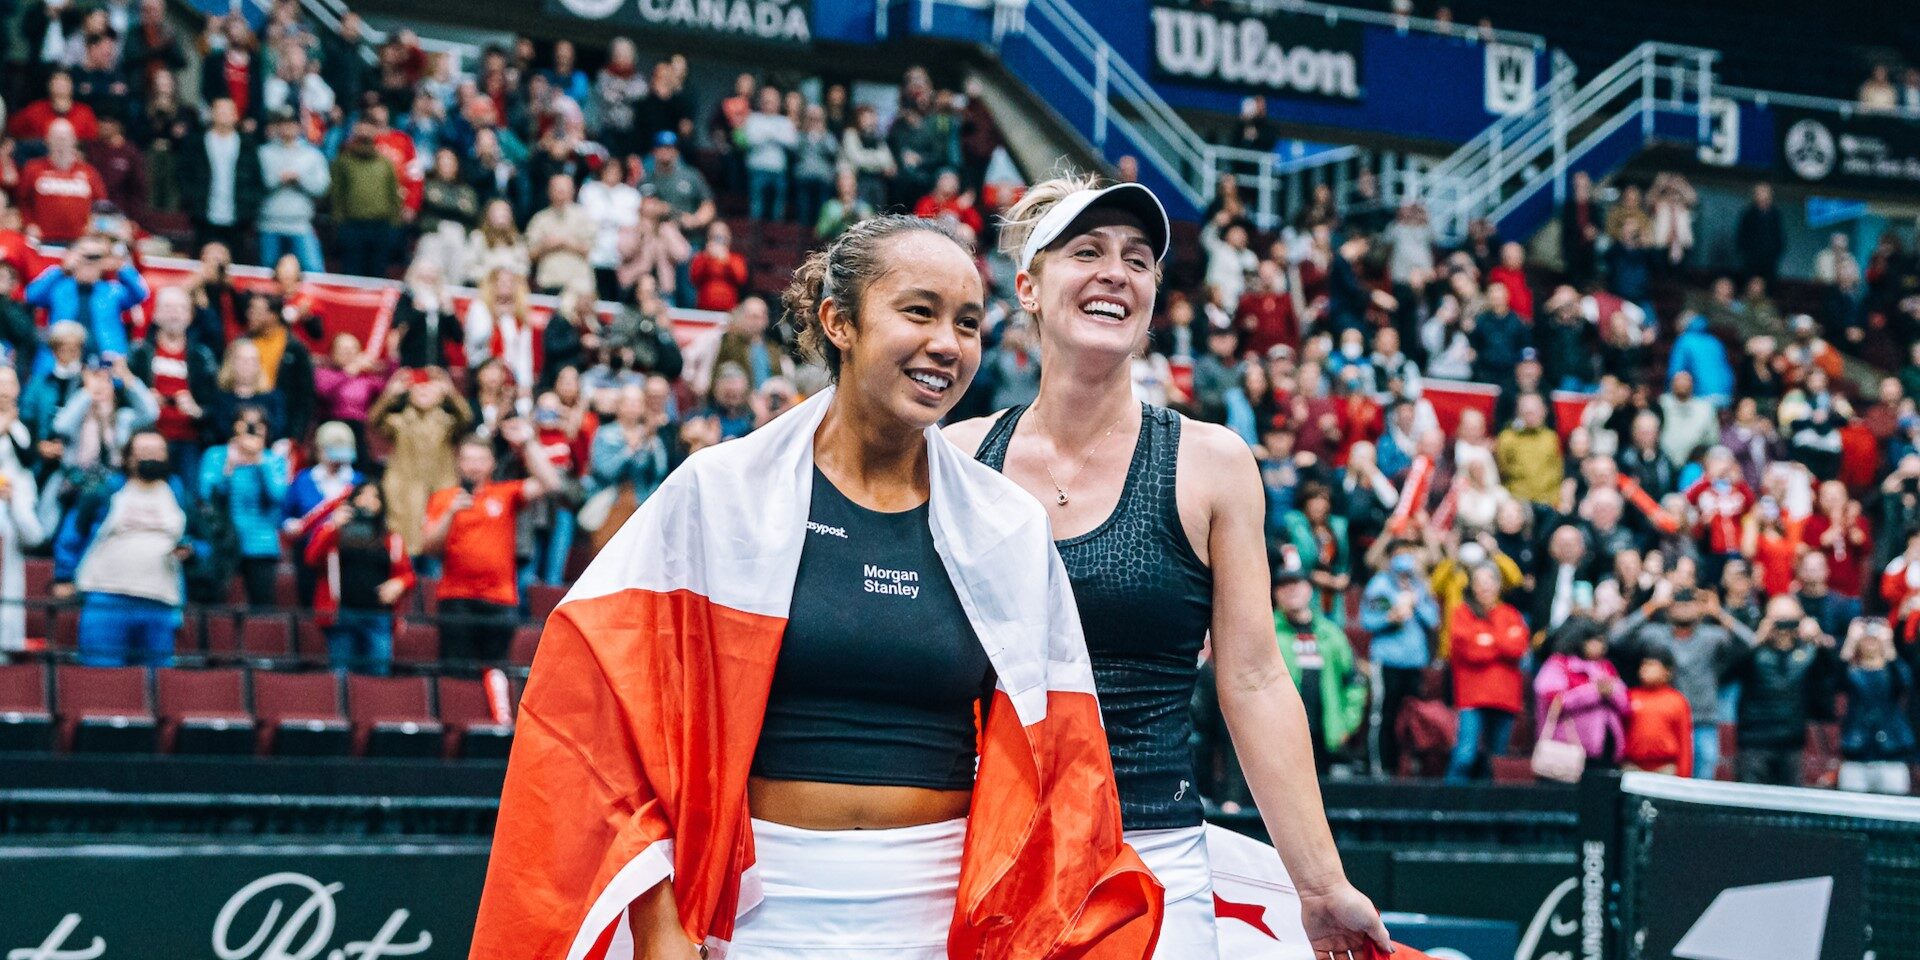 Leylah Fernandez (left) and Gabriela Dabrowski smile on court holding Canadian flags.